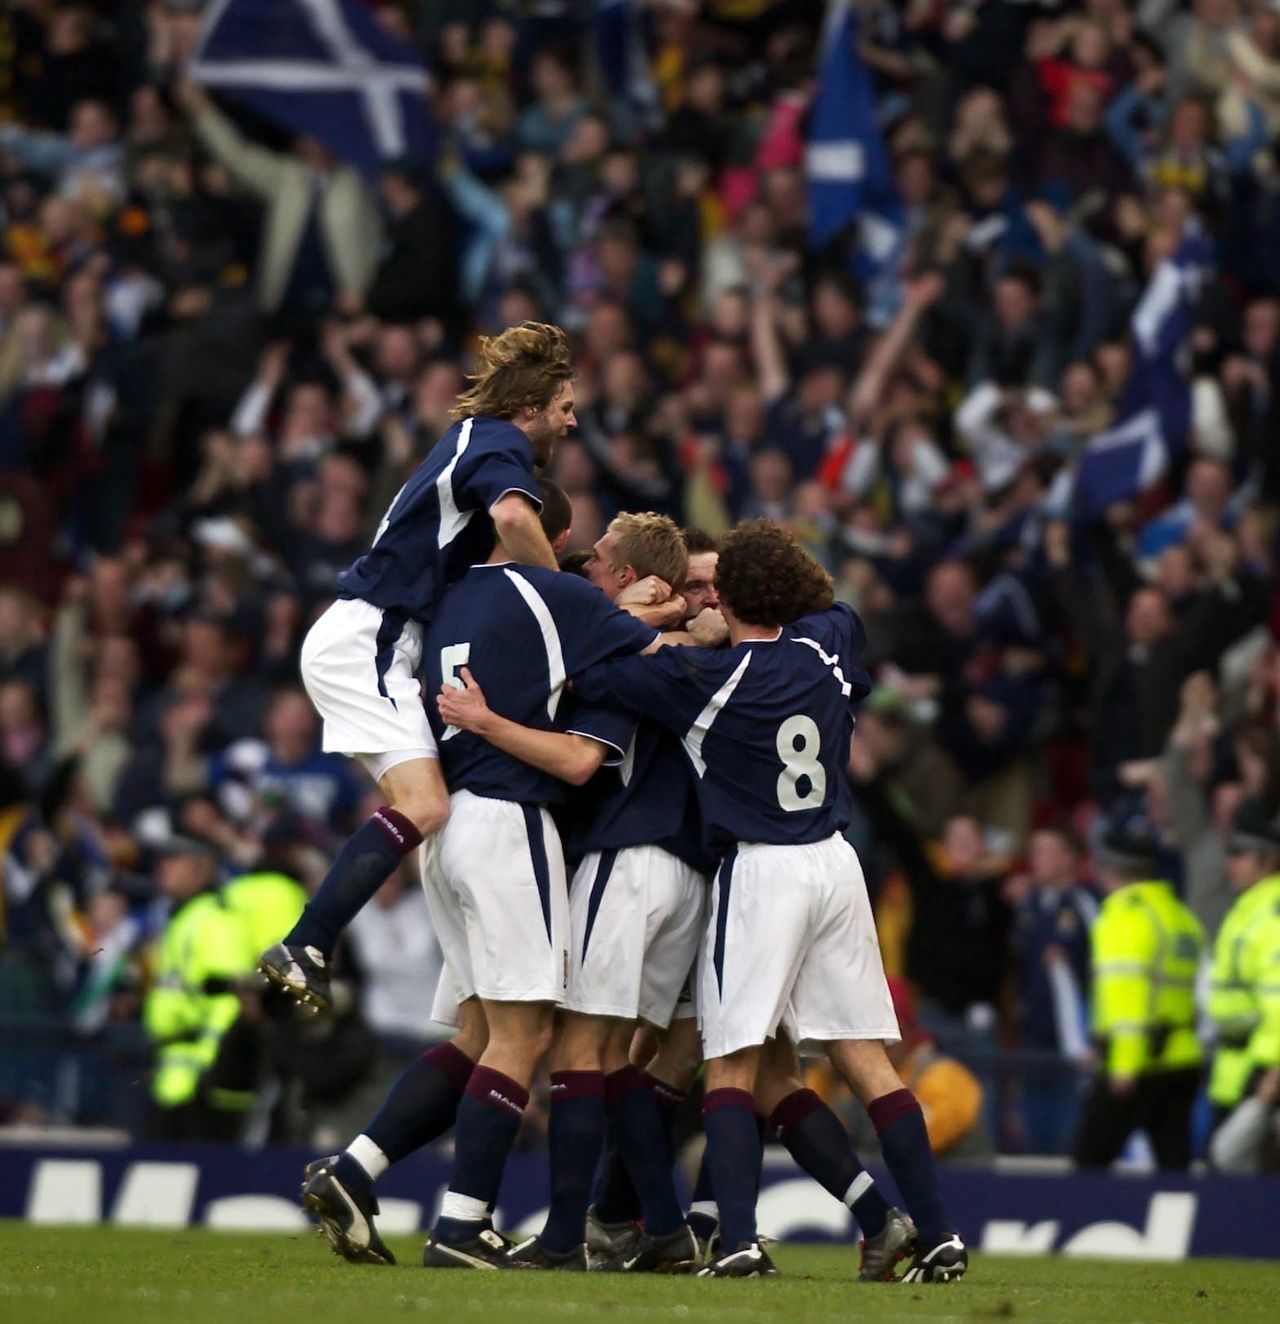 Steven Pressley leaps highest as the Scotland team piles on James McFadden to celebrate his strike against Holland. It was the only goal of the game in a famous win, but the joy turned to misery as the Scots went down 6-0 in the second leg in Amsterdam.